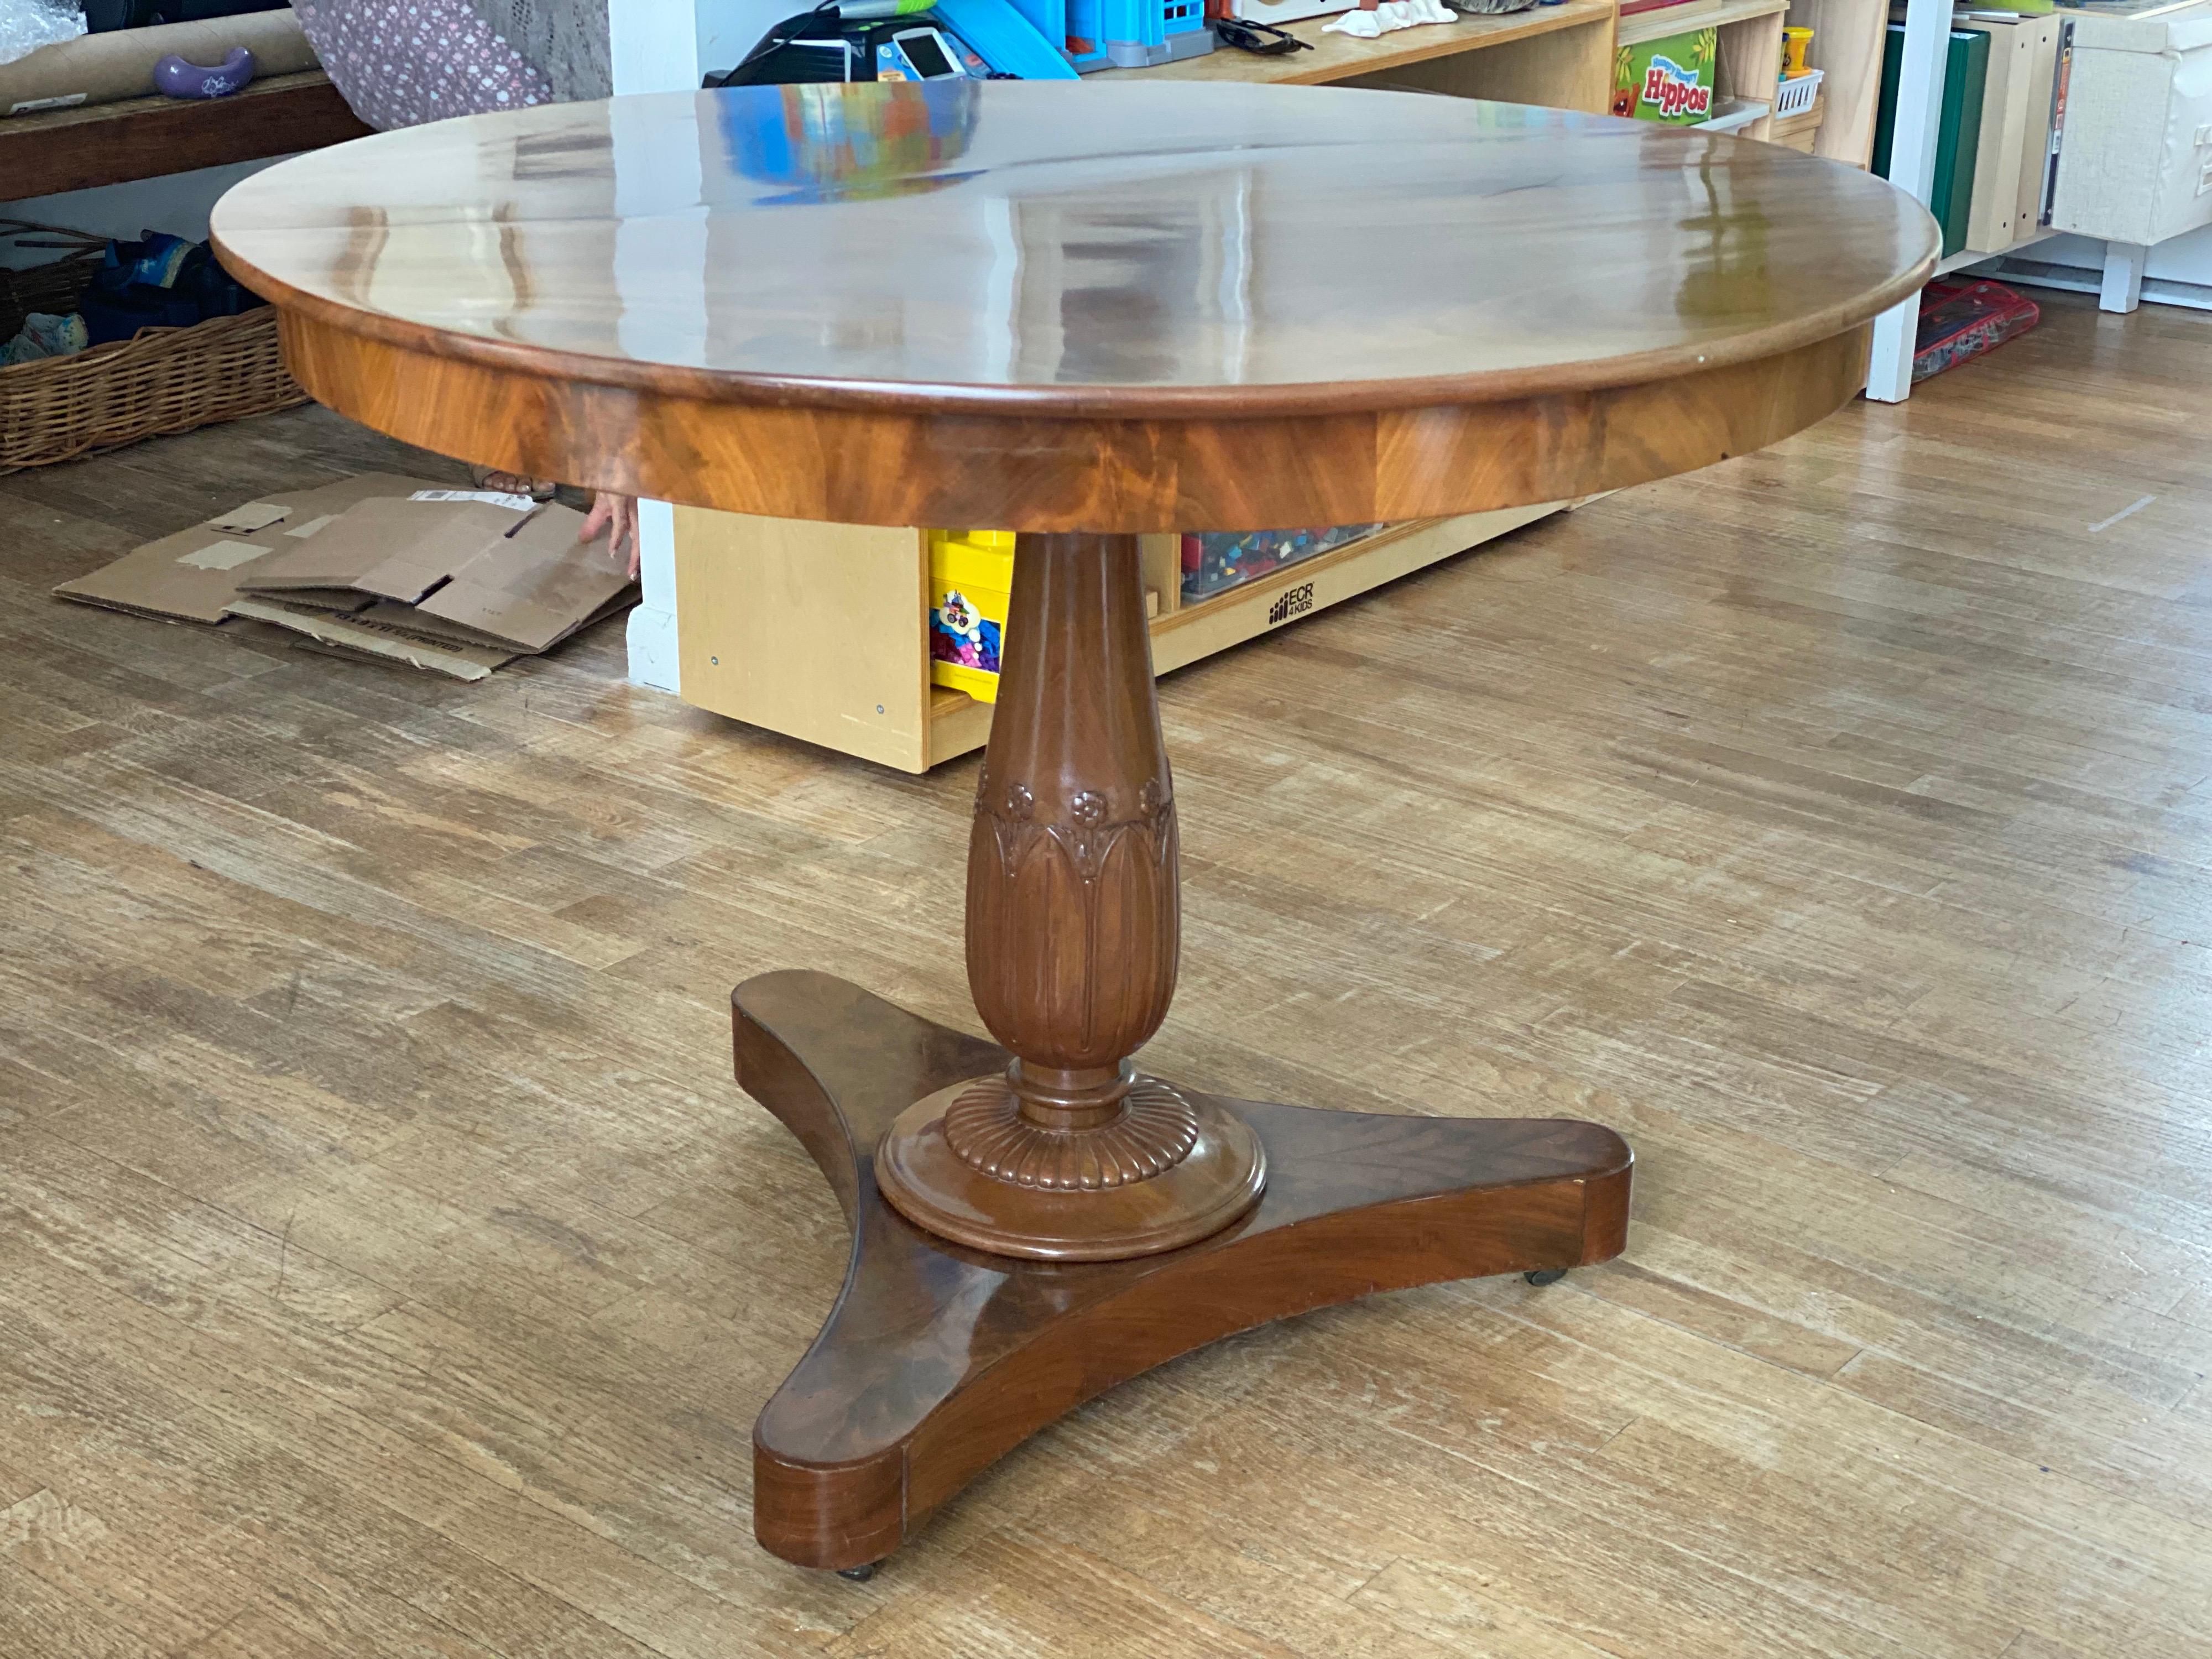 Round Mahogany Pedestal dining table, early 20th century
Beautiful flame mahogany top. Floral and leaf carving on pedestal ending on a tripod base on casters.
Some sun fading to top, light wear to finish, earlier restoration seen under top to stop